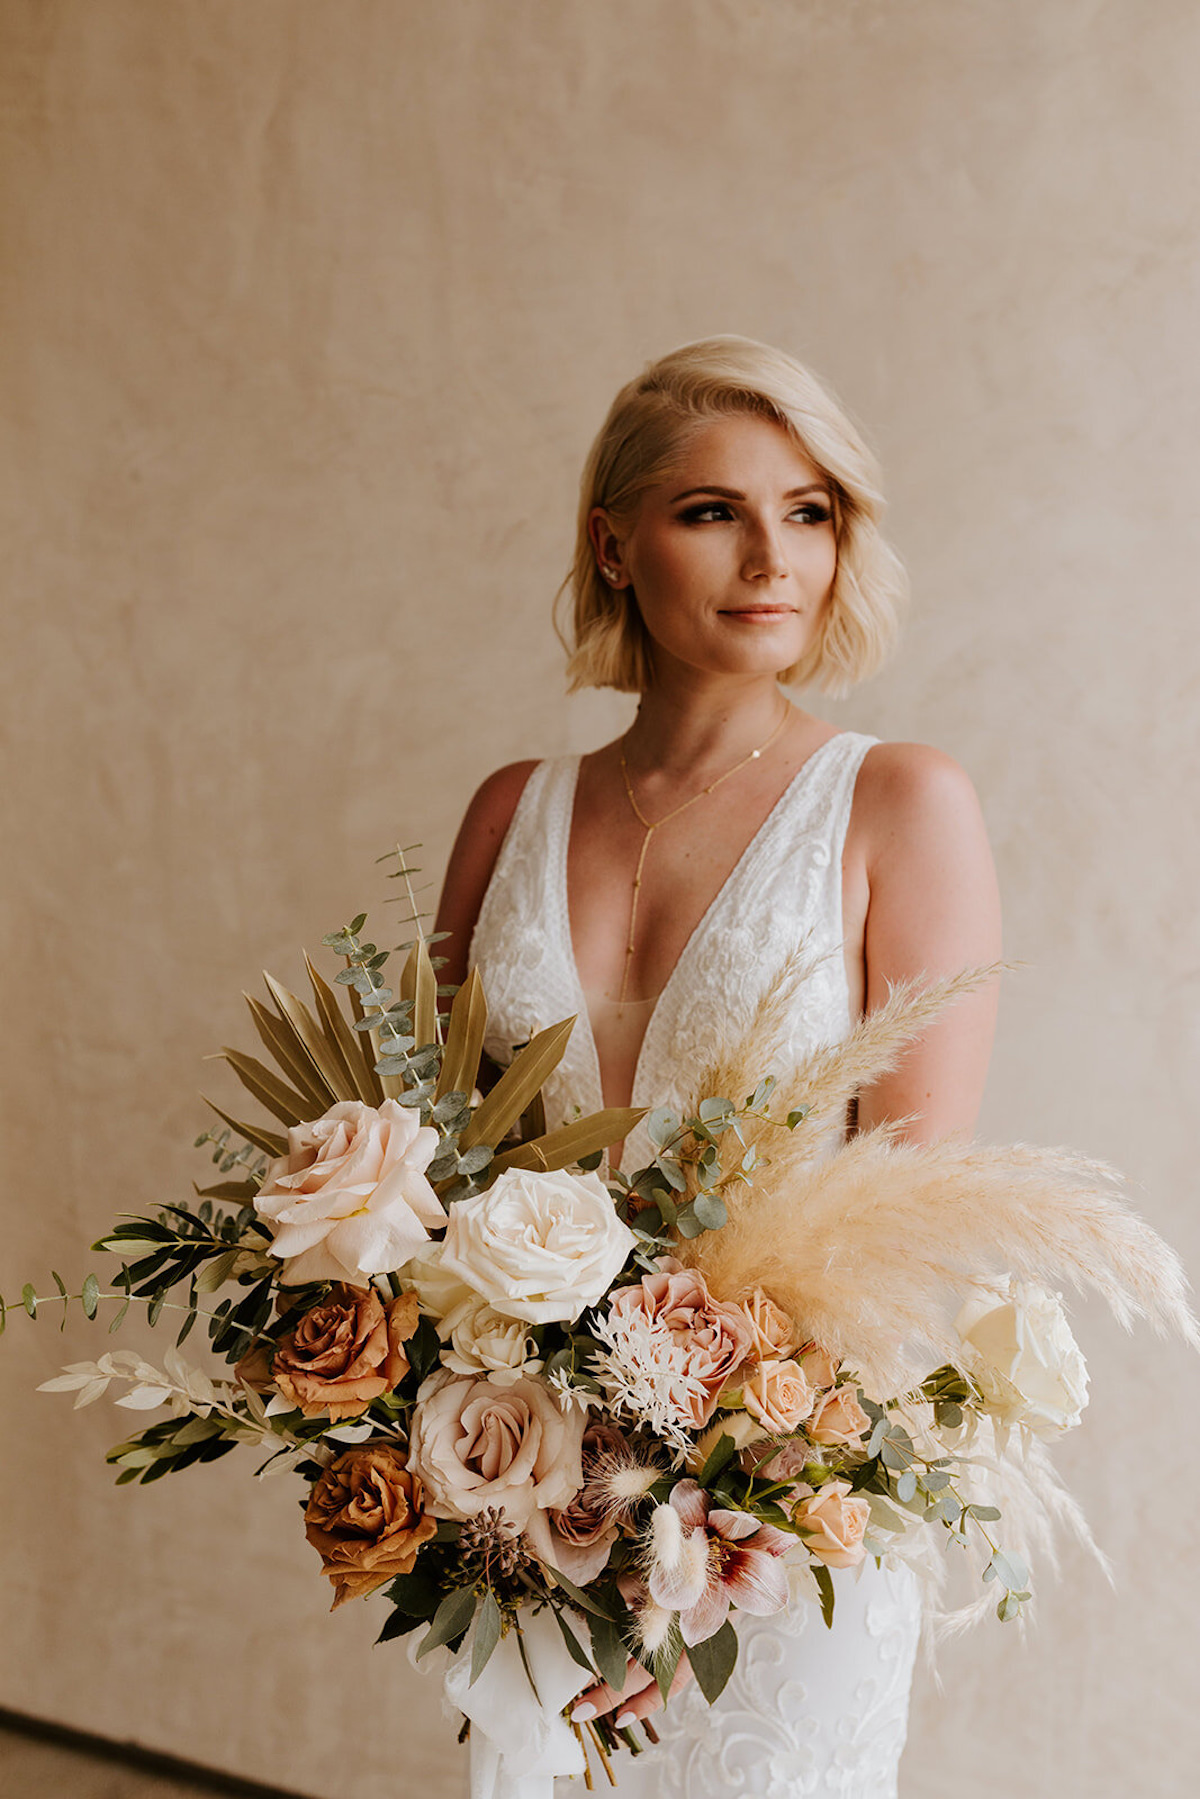 Neutral fall wedding colors Fall bridal bouquet with pampas grass -Photographer: Tida Svy